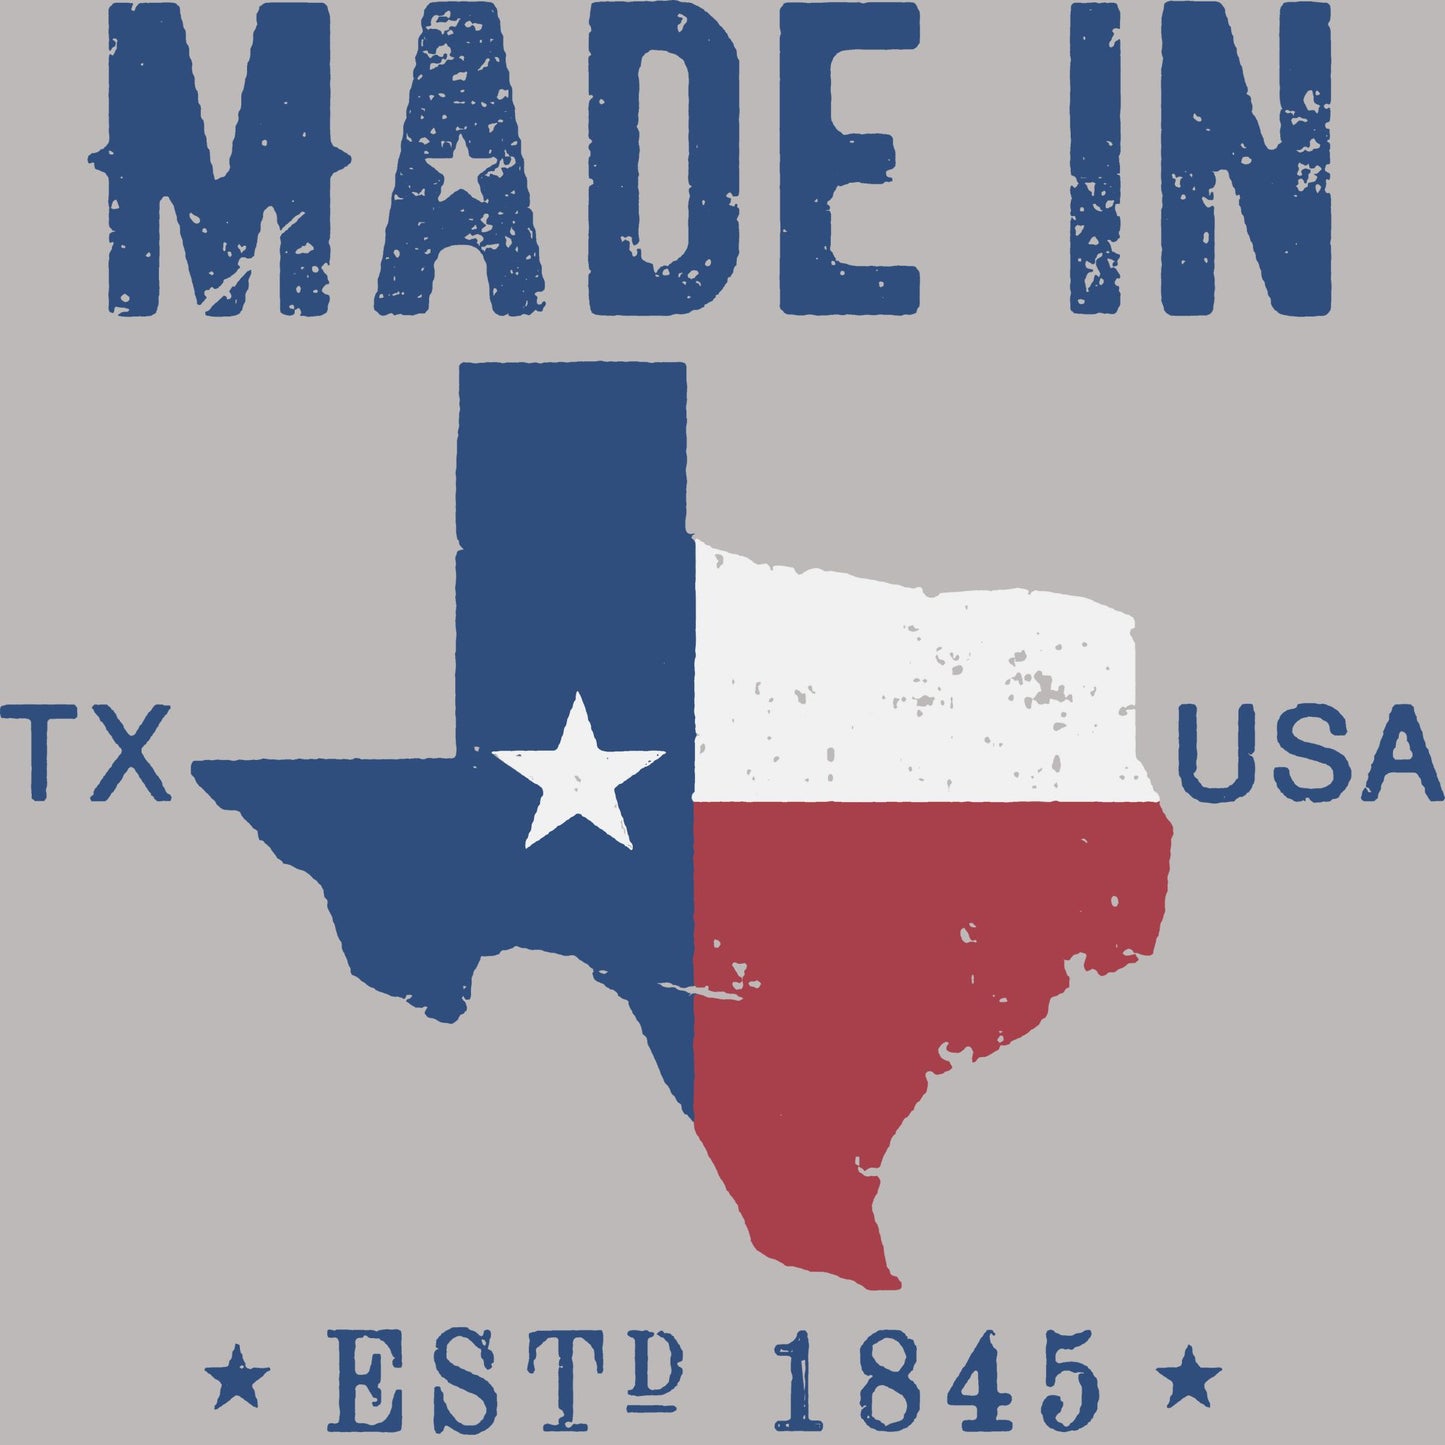 Texas Lone Star State T-Shirt | Stylish Texan Apparel for Every Proud Texan